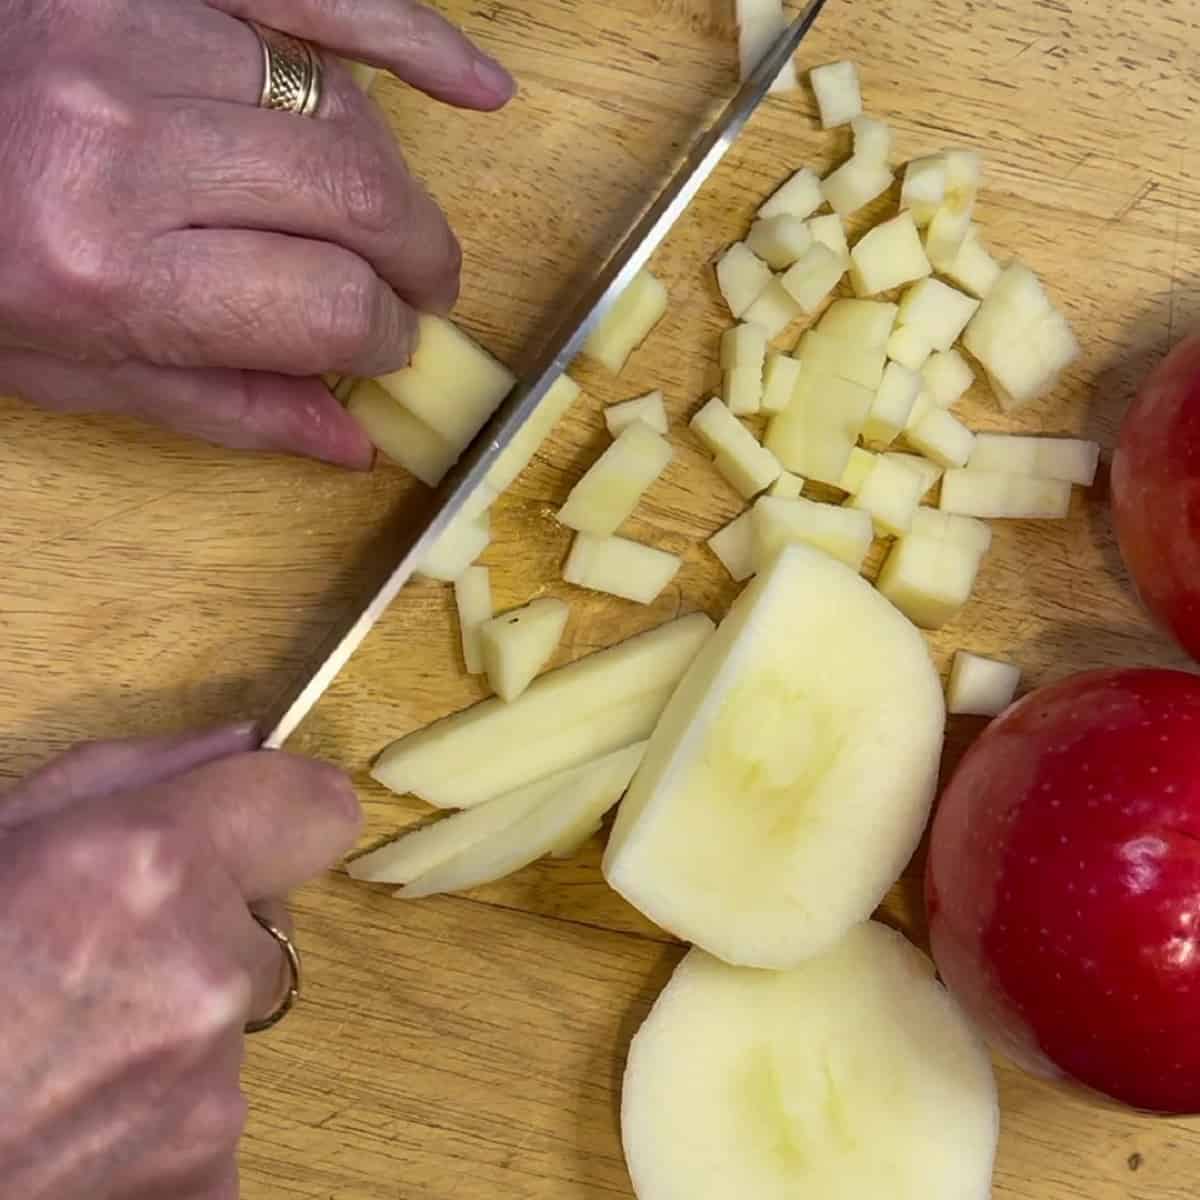 A hand and knife dicing apples for making apple turnovers.